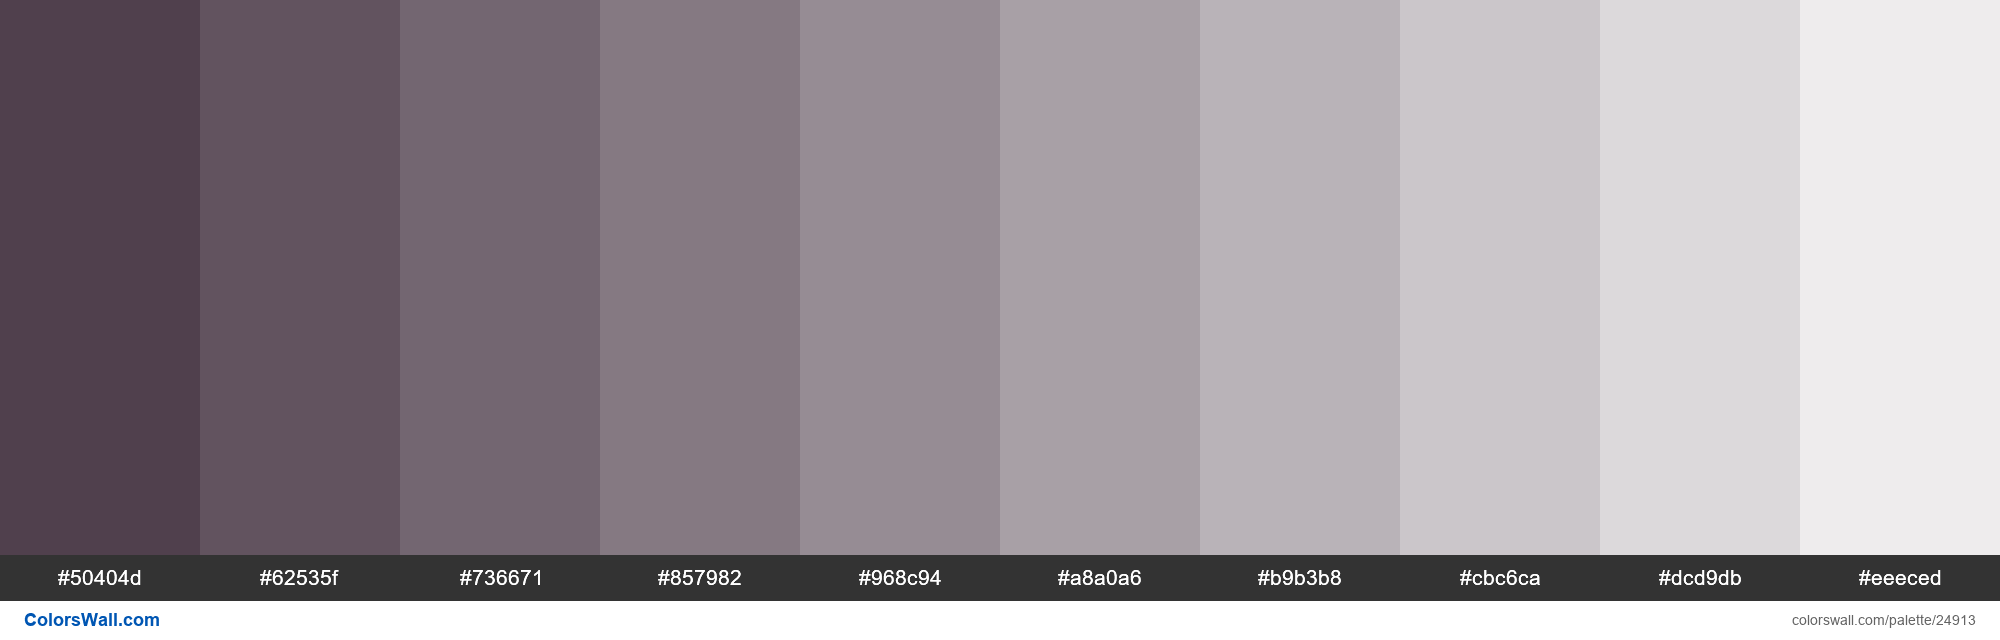 colorswall on X: Tints of Taupe Grey color #8B8589 hex #8b8589